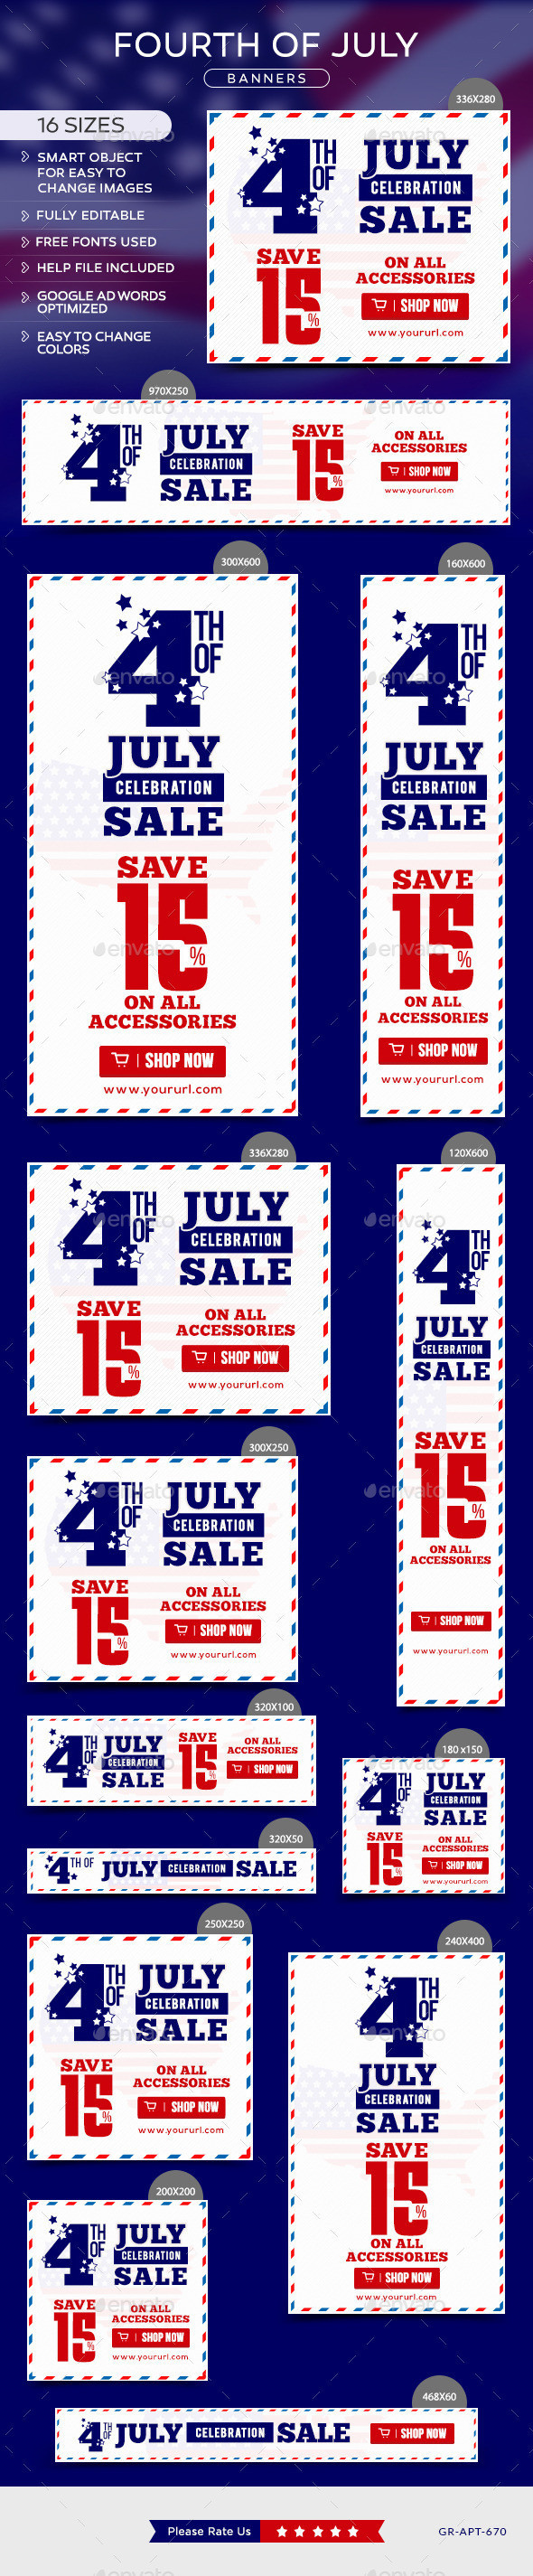 Apt 670 fourth 20of 20july 20banners preview